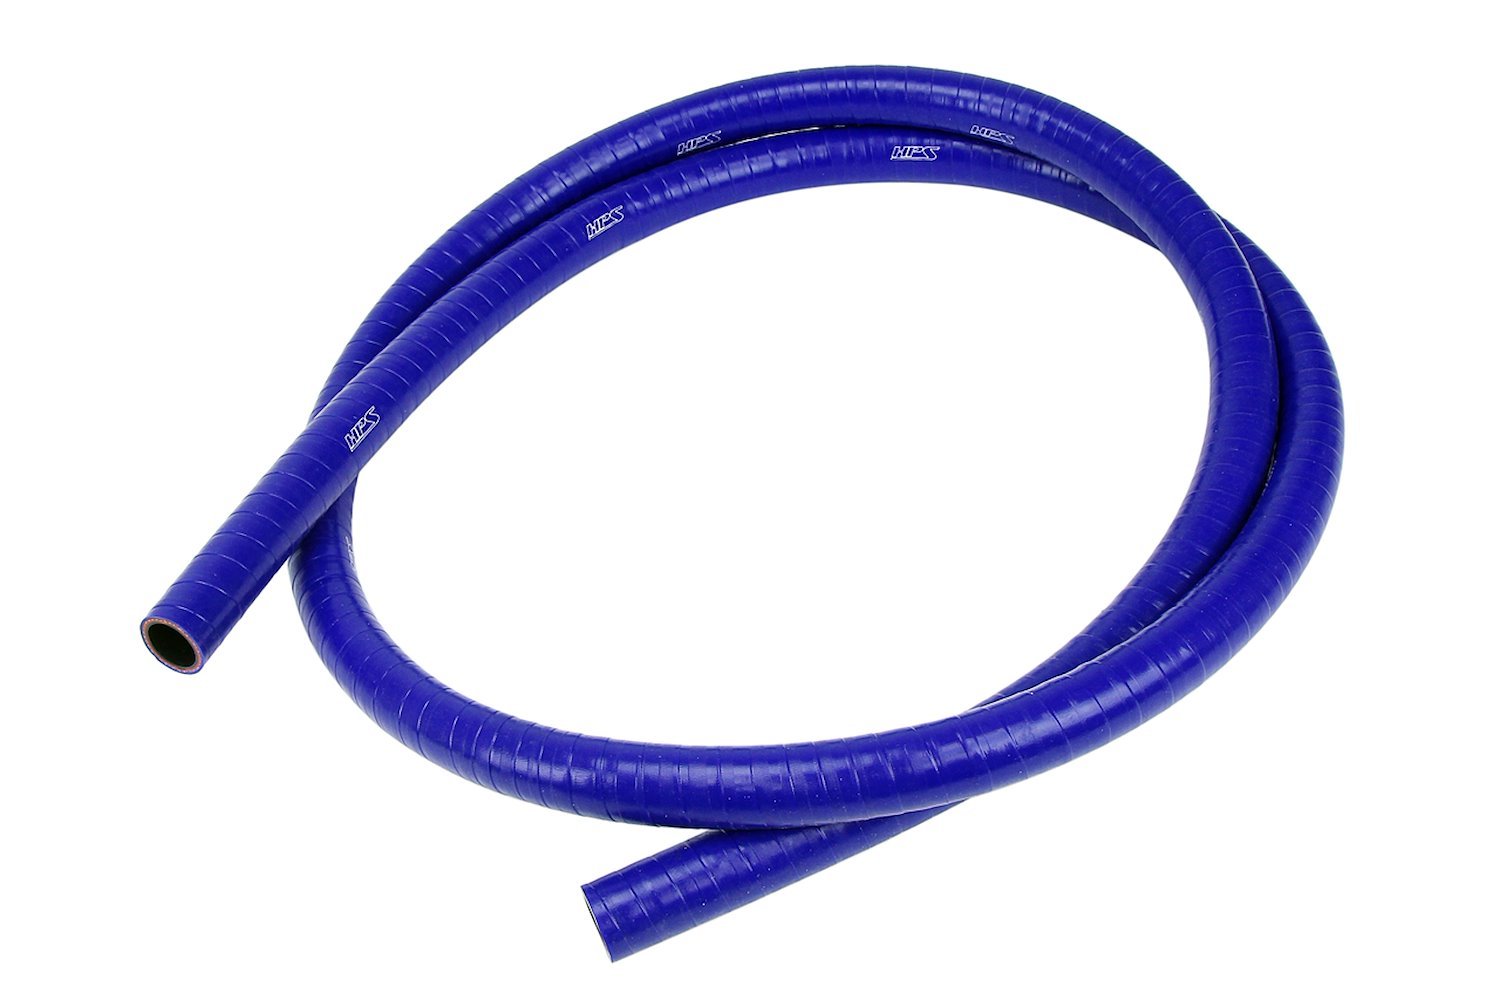 FKM-2F-087-BLUE FKM Silicone Hose, Silicone Oil Resistant Hose, High-Temp 1-Ply Reinforced, 7/8 in. ID, 2 ft. Long, Blue